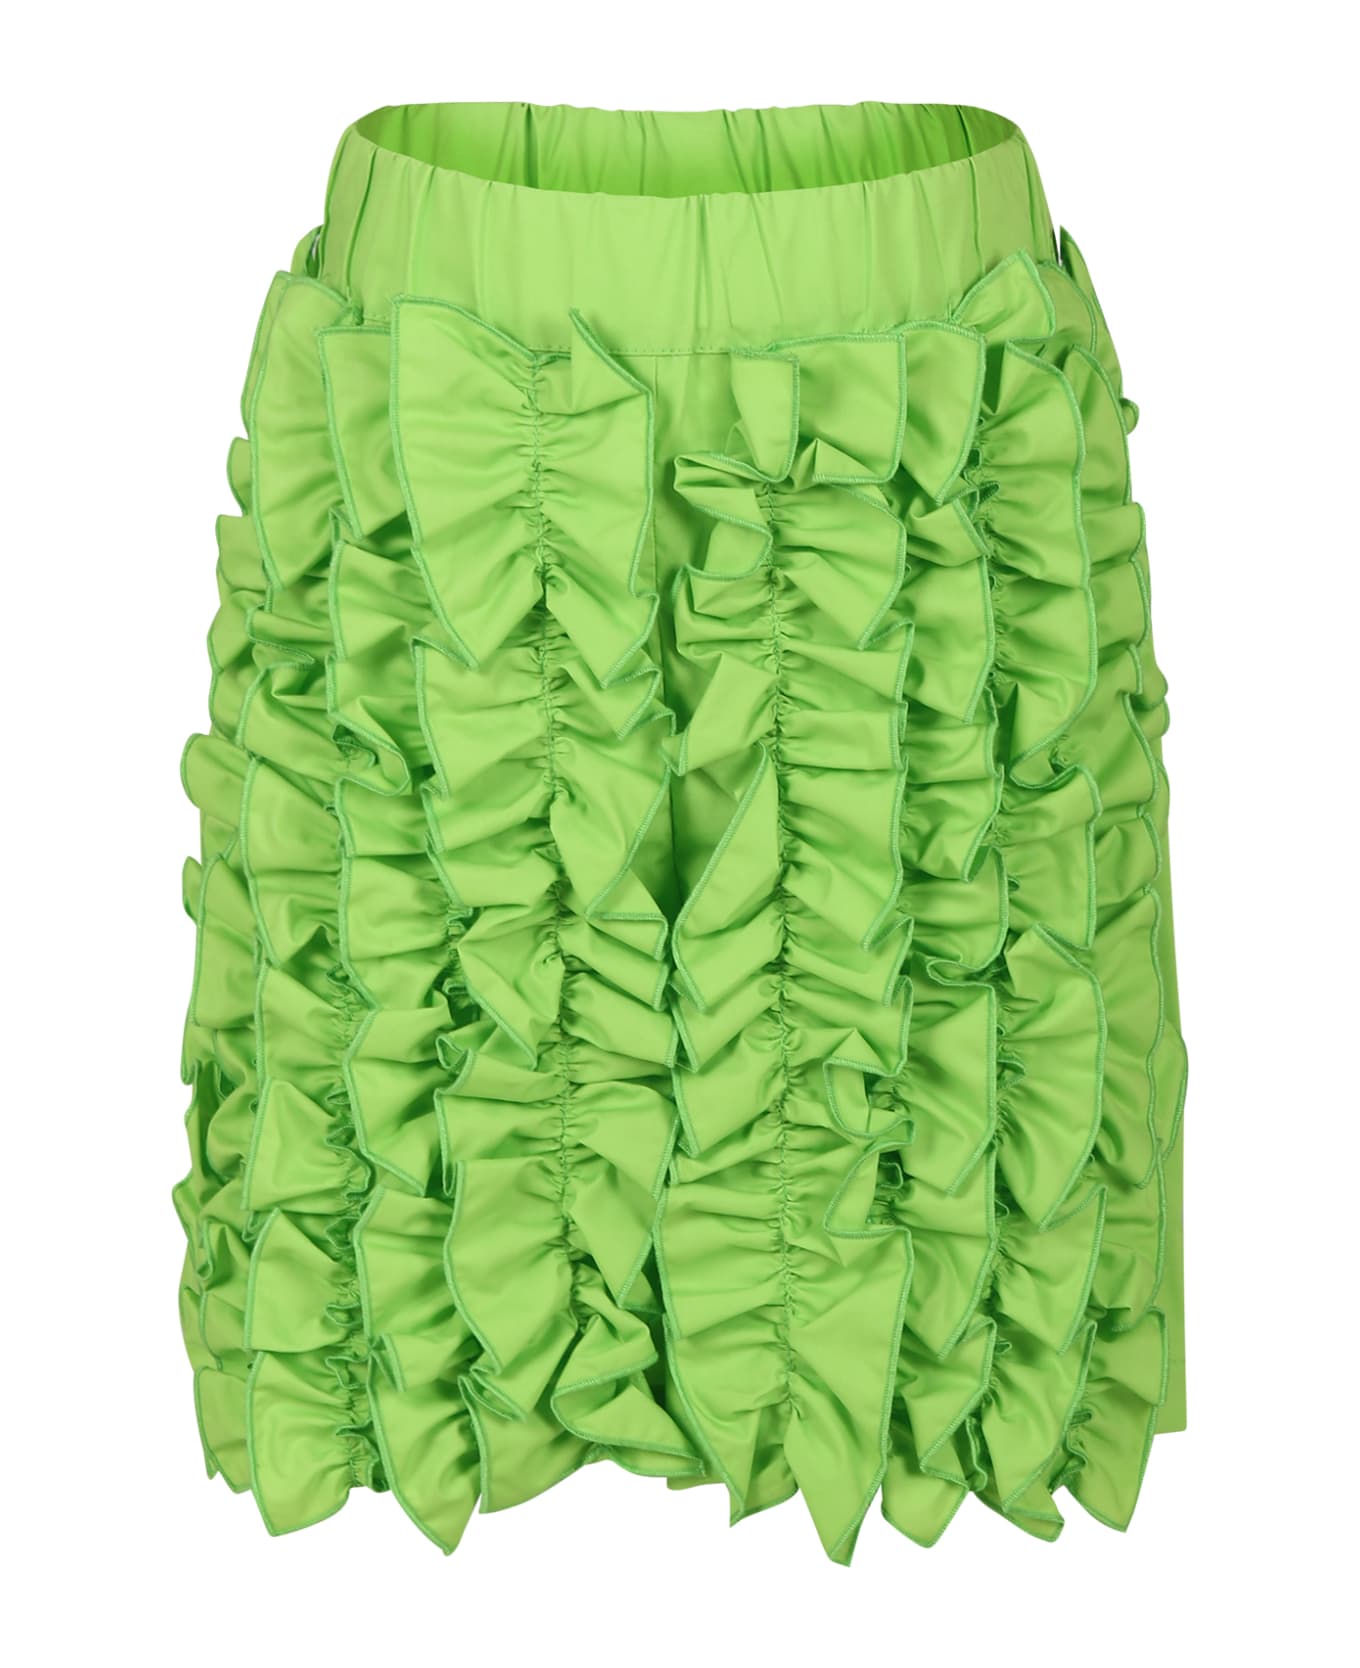 MSGM Green Shorts For Girl With Logo - Green ボトムス